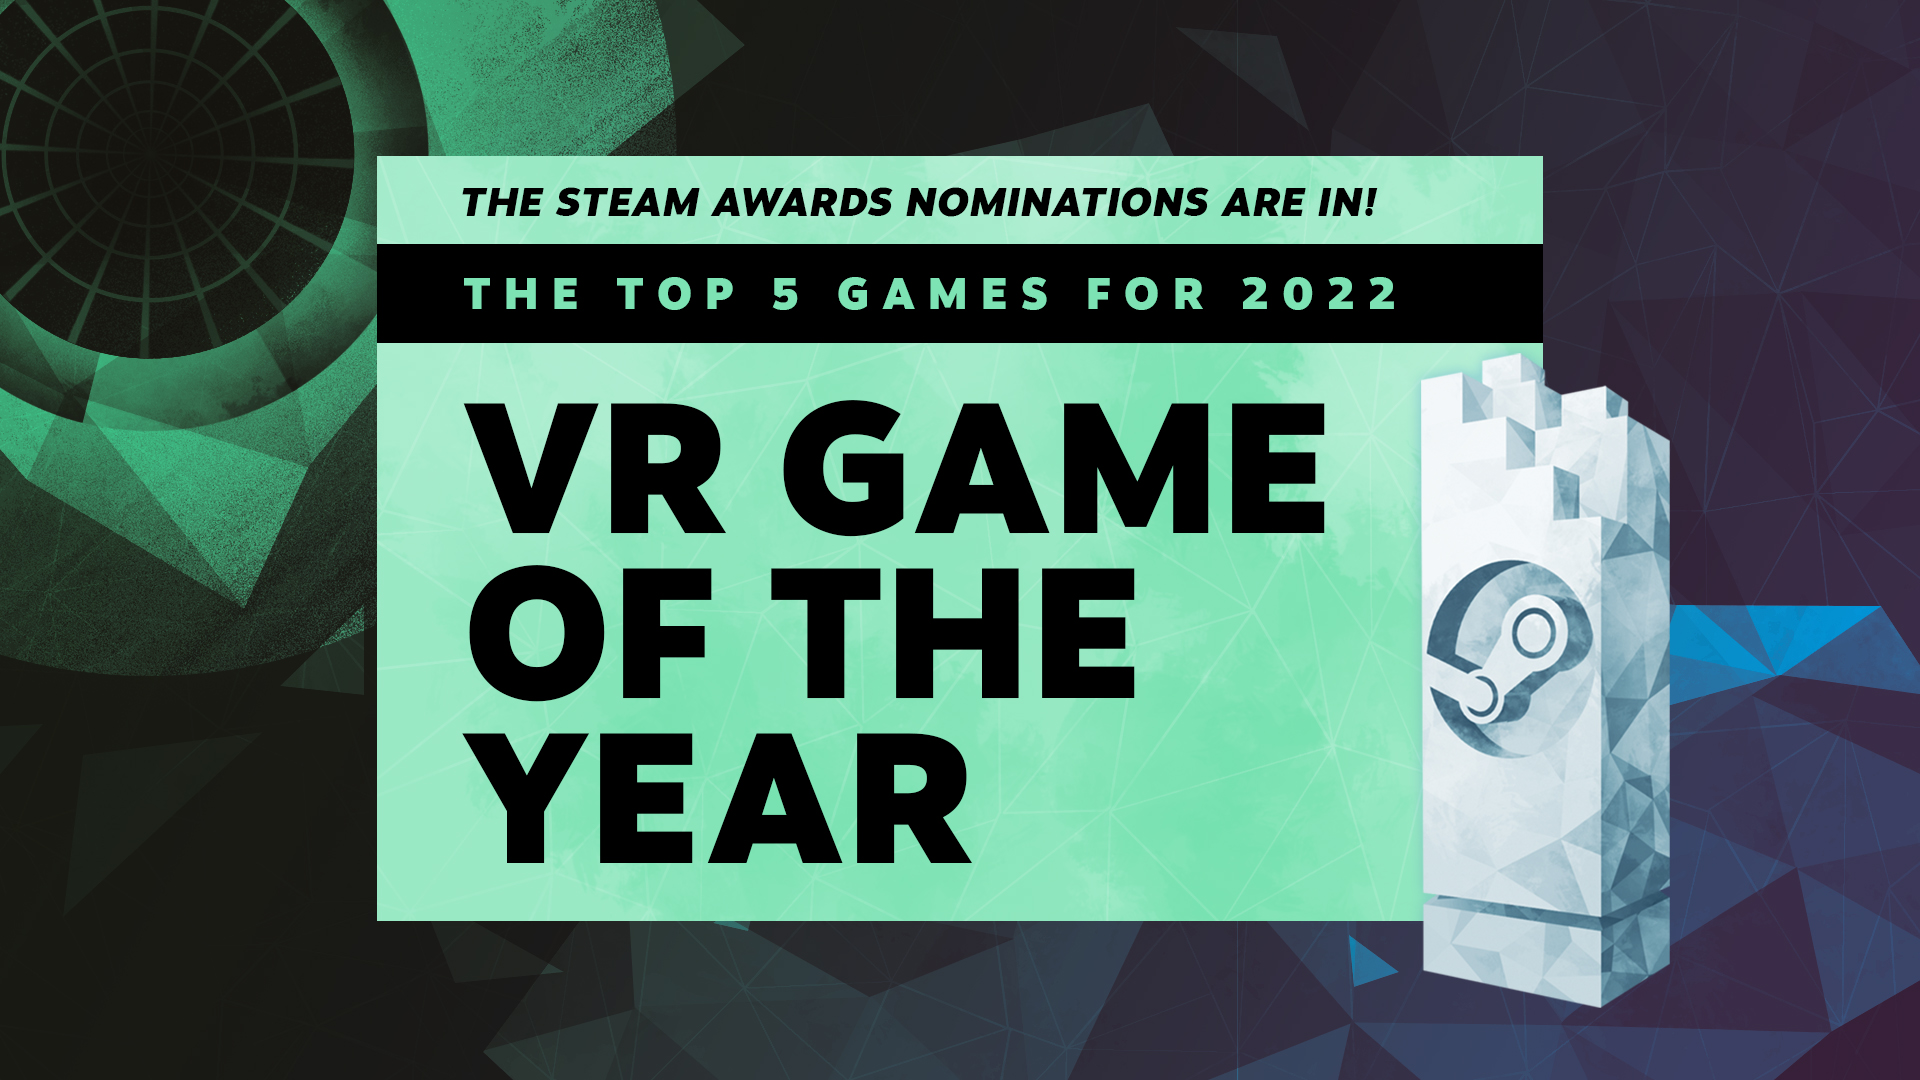 Bonelab has been nominated for VR Game of the Year 2022! Thank you